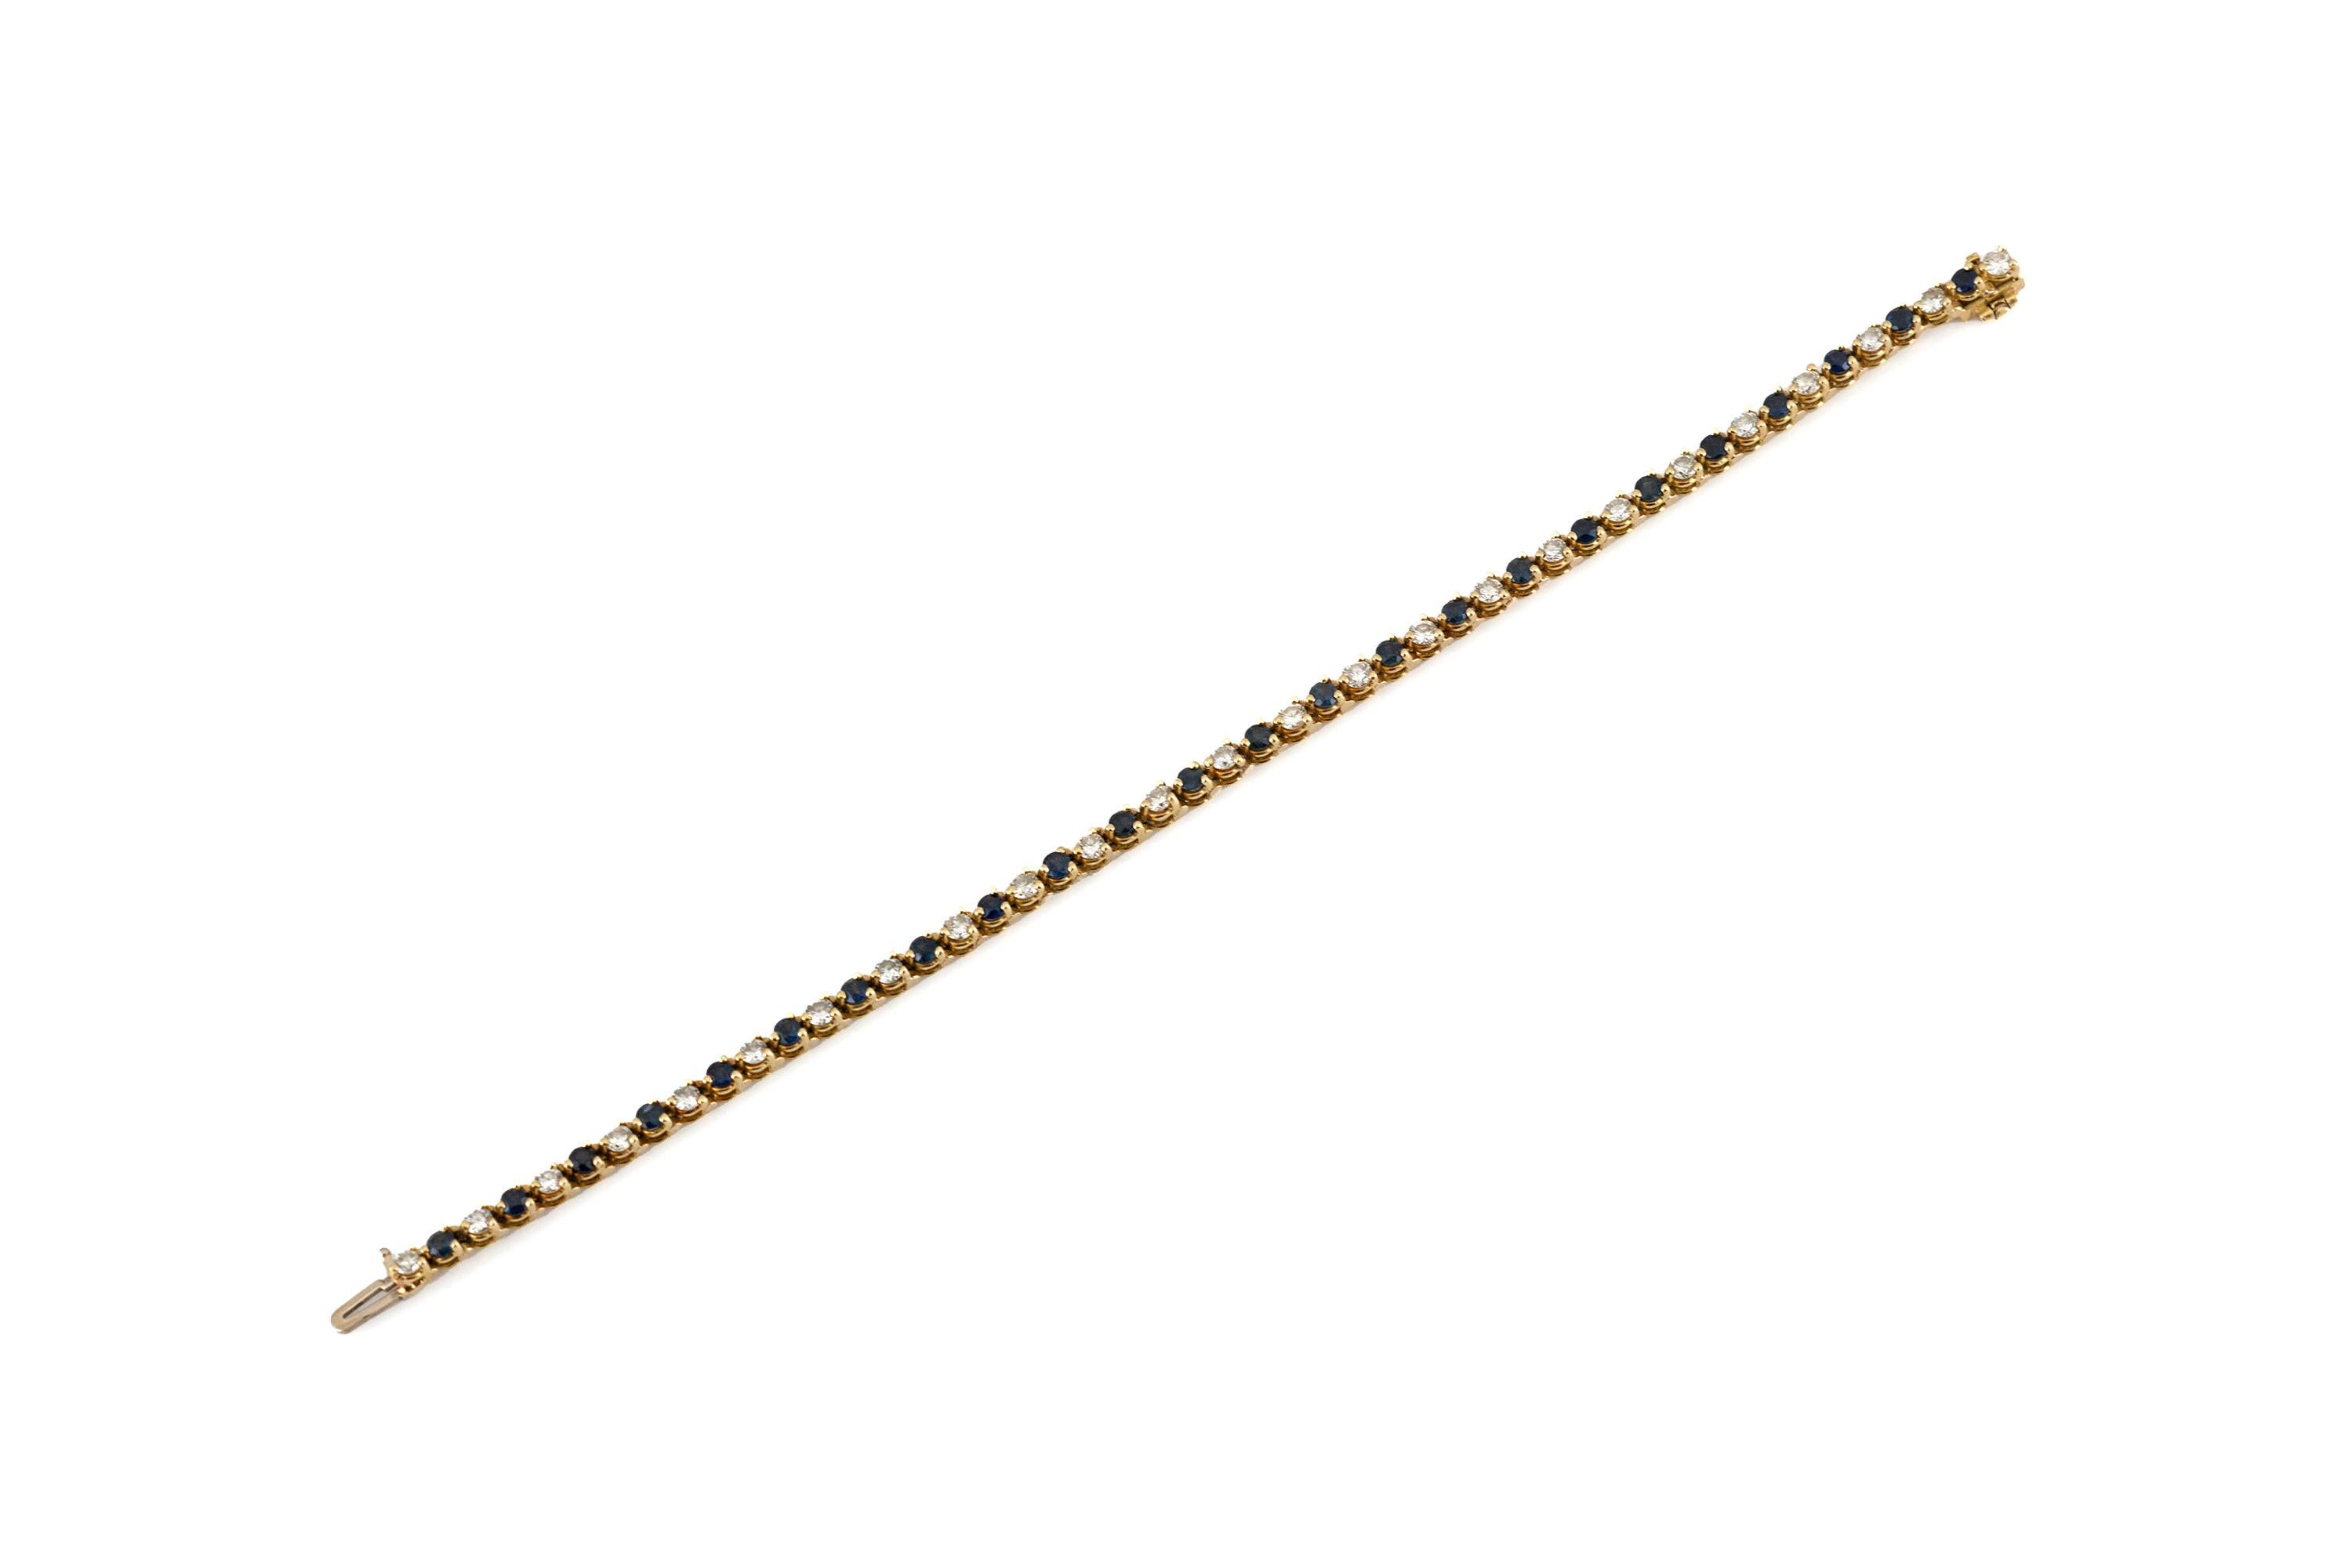 The bracelet is finely crafted in 14k yellow gold with sapphire weighing approximately total of 1.30 carat and diamonds weighing approximately total of 1.30 carat.
Circa 1980.